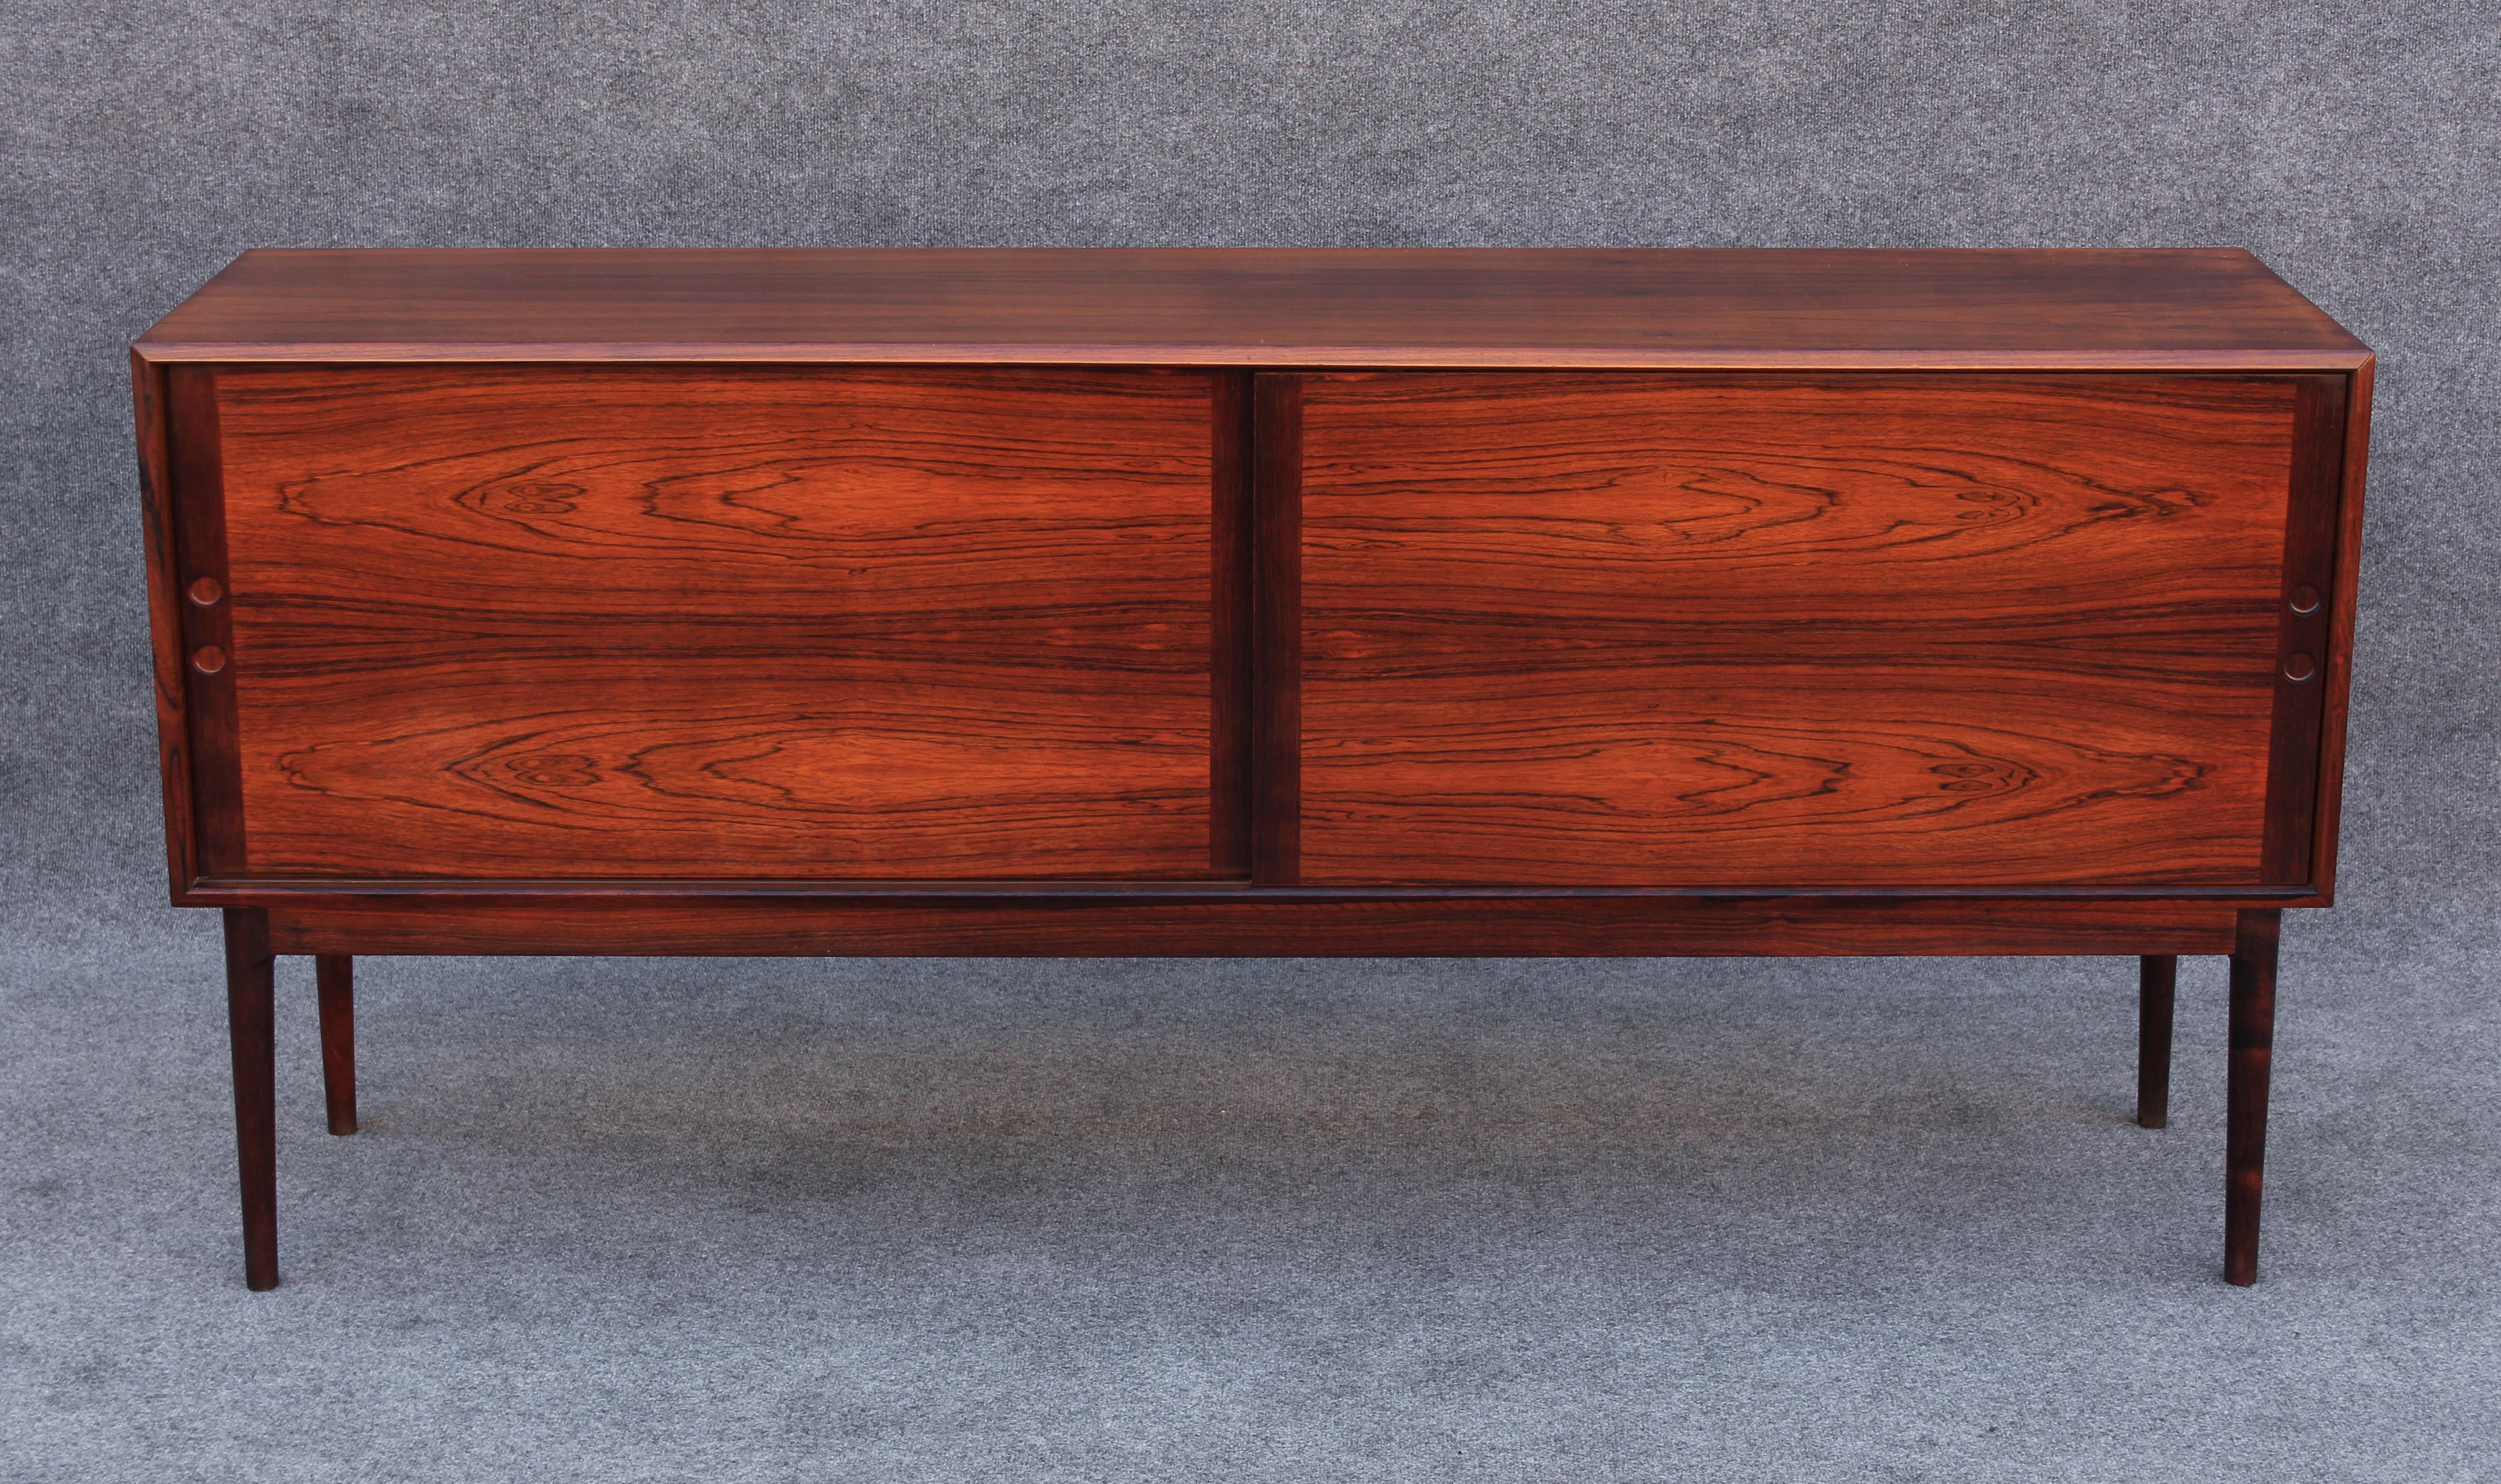 Made in Norway in the 1960s, this cabinet was made in the wake of the explosion of Danish furniture during the mid century modern movement. Brilliantly figured high contrast rosewood elevates this piece when combined with its luxurious and sleek